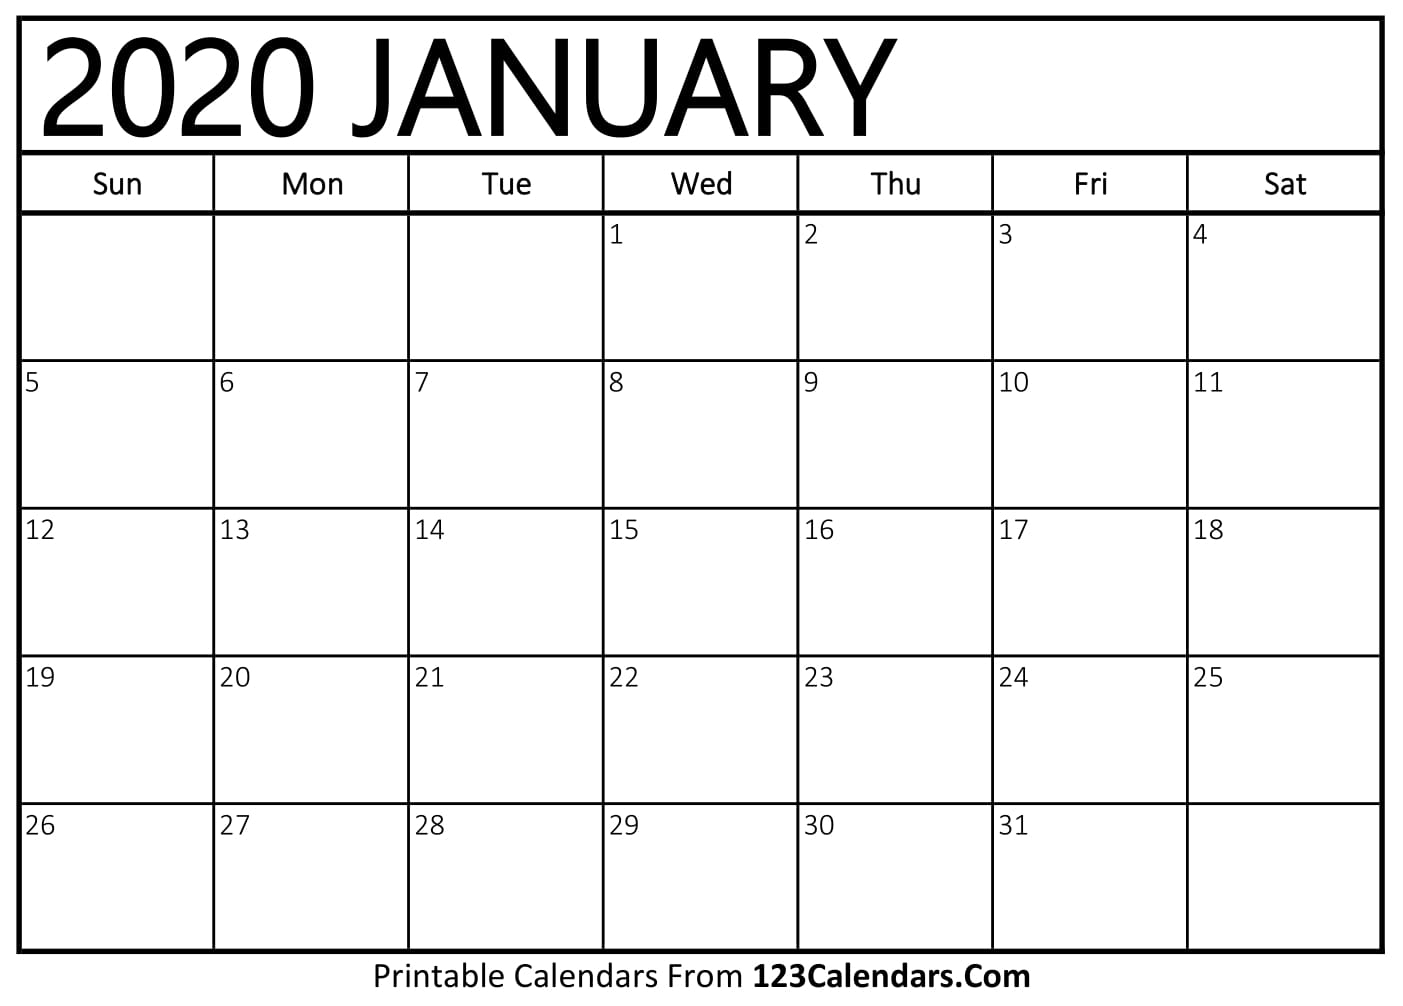 Free Printable Calendar | 123Calendars for Print Free Calendars Without Downloading